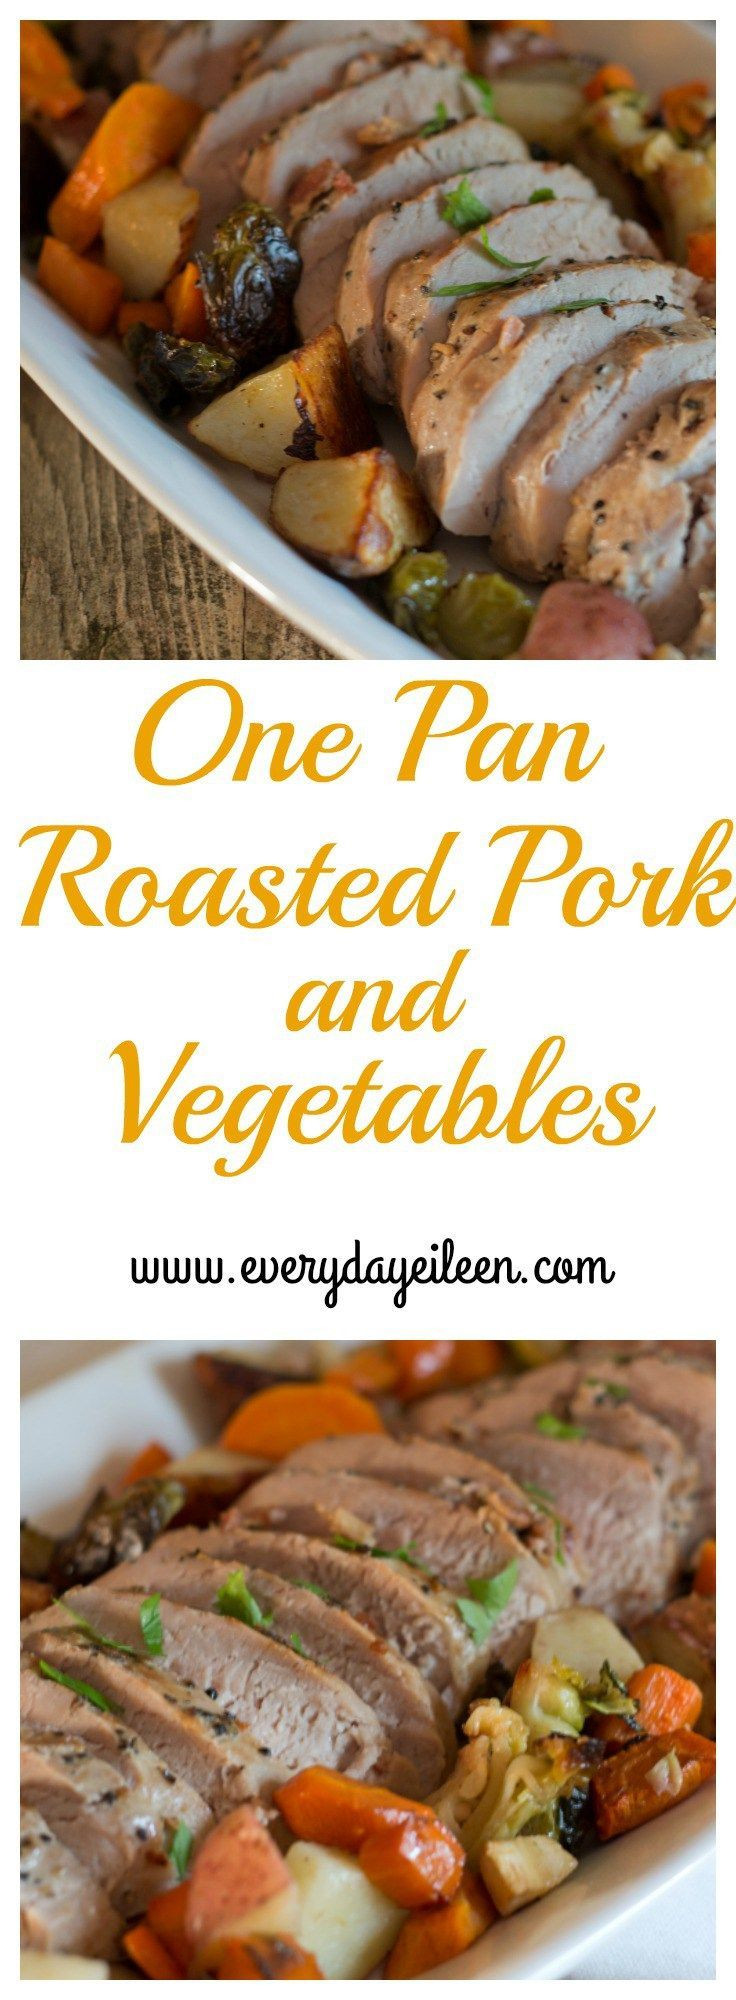 One Pan Easter Dinner
 e pan roasted pork and ve ables is a quick and easy